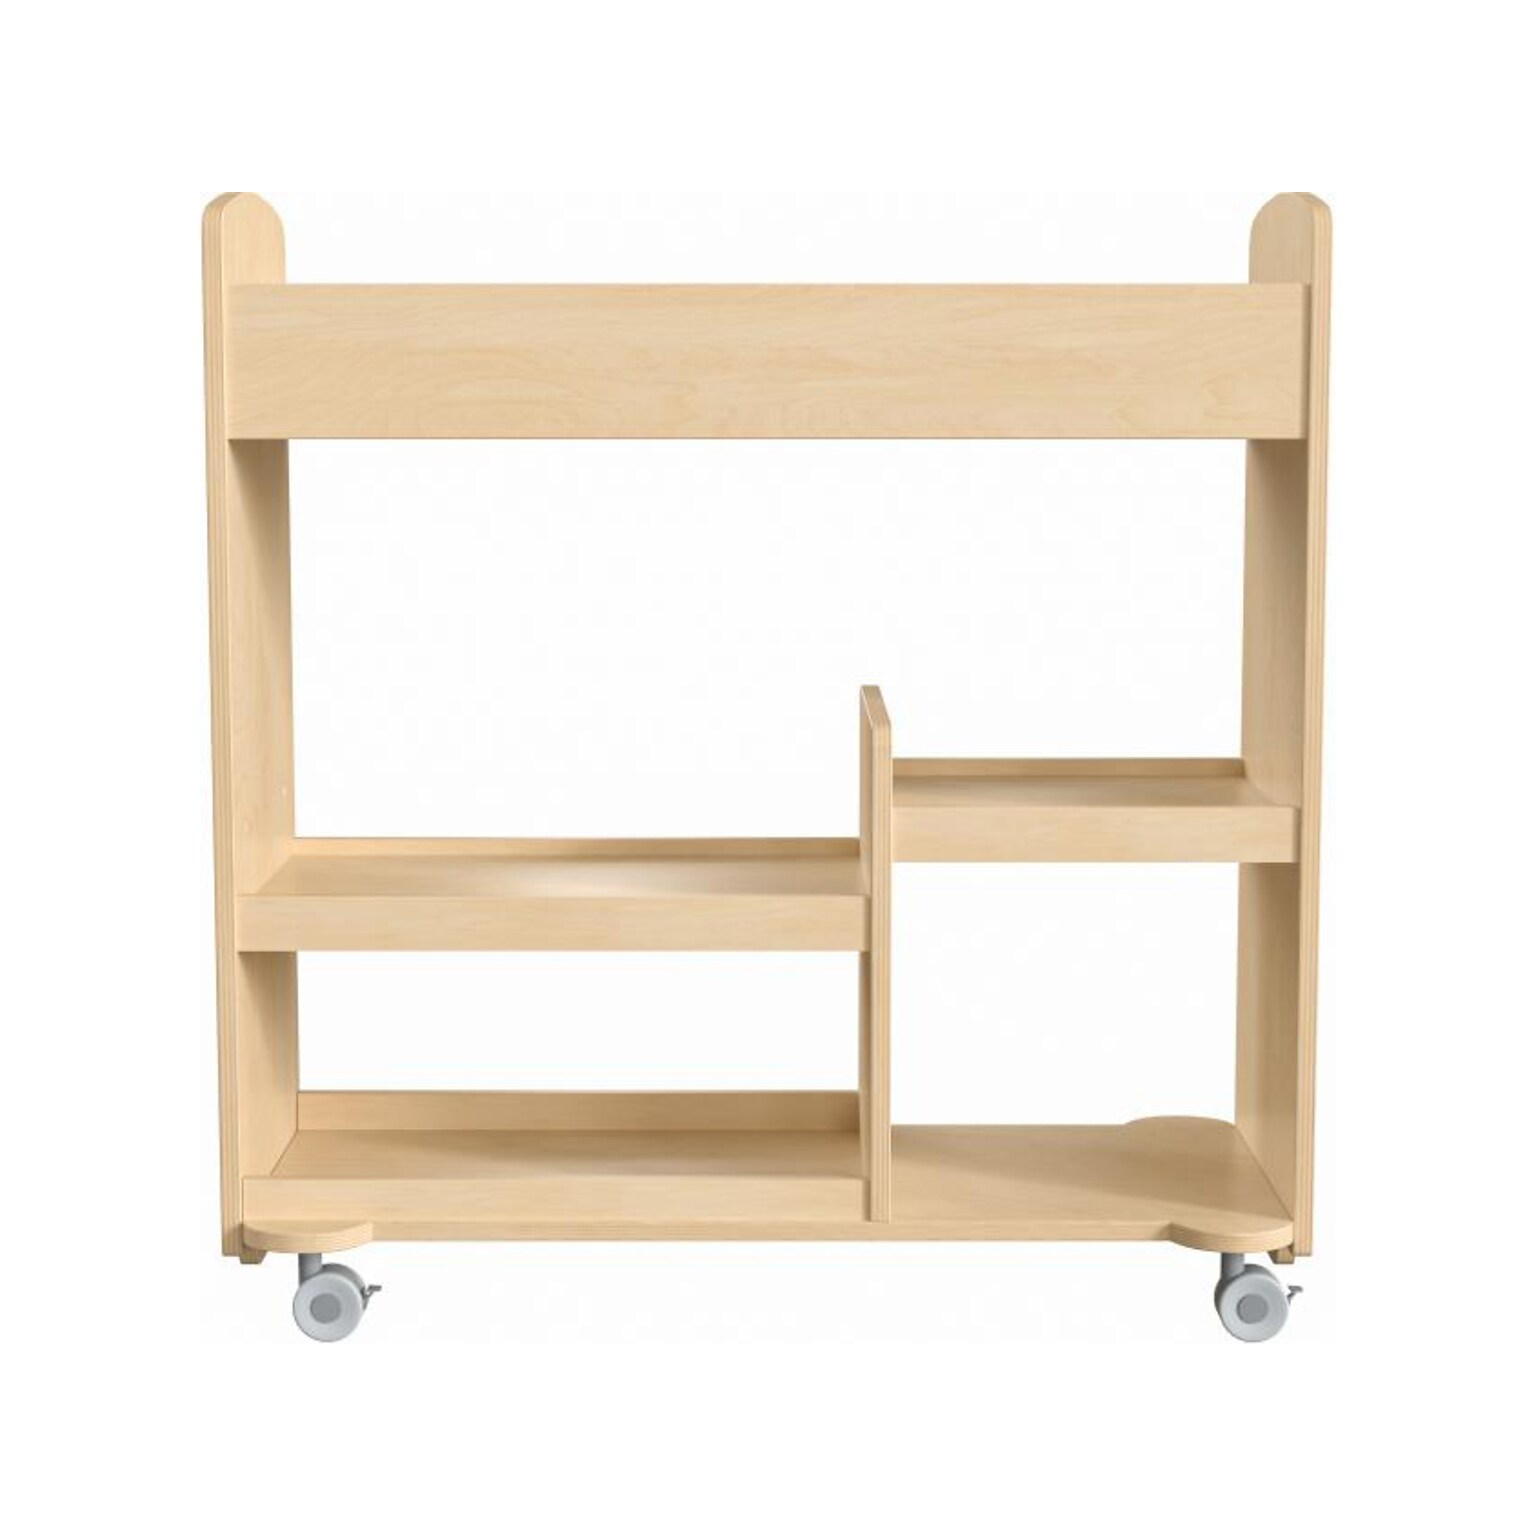 Flash Furniture Bright Beginnings Mobile 18-Section Storage Cart, 31.75H x 33.25W x 15.75D, Natural Birch Plywood